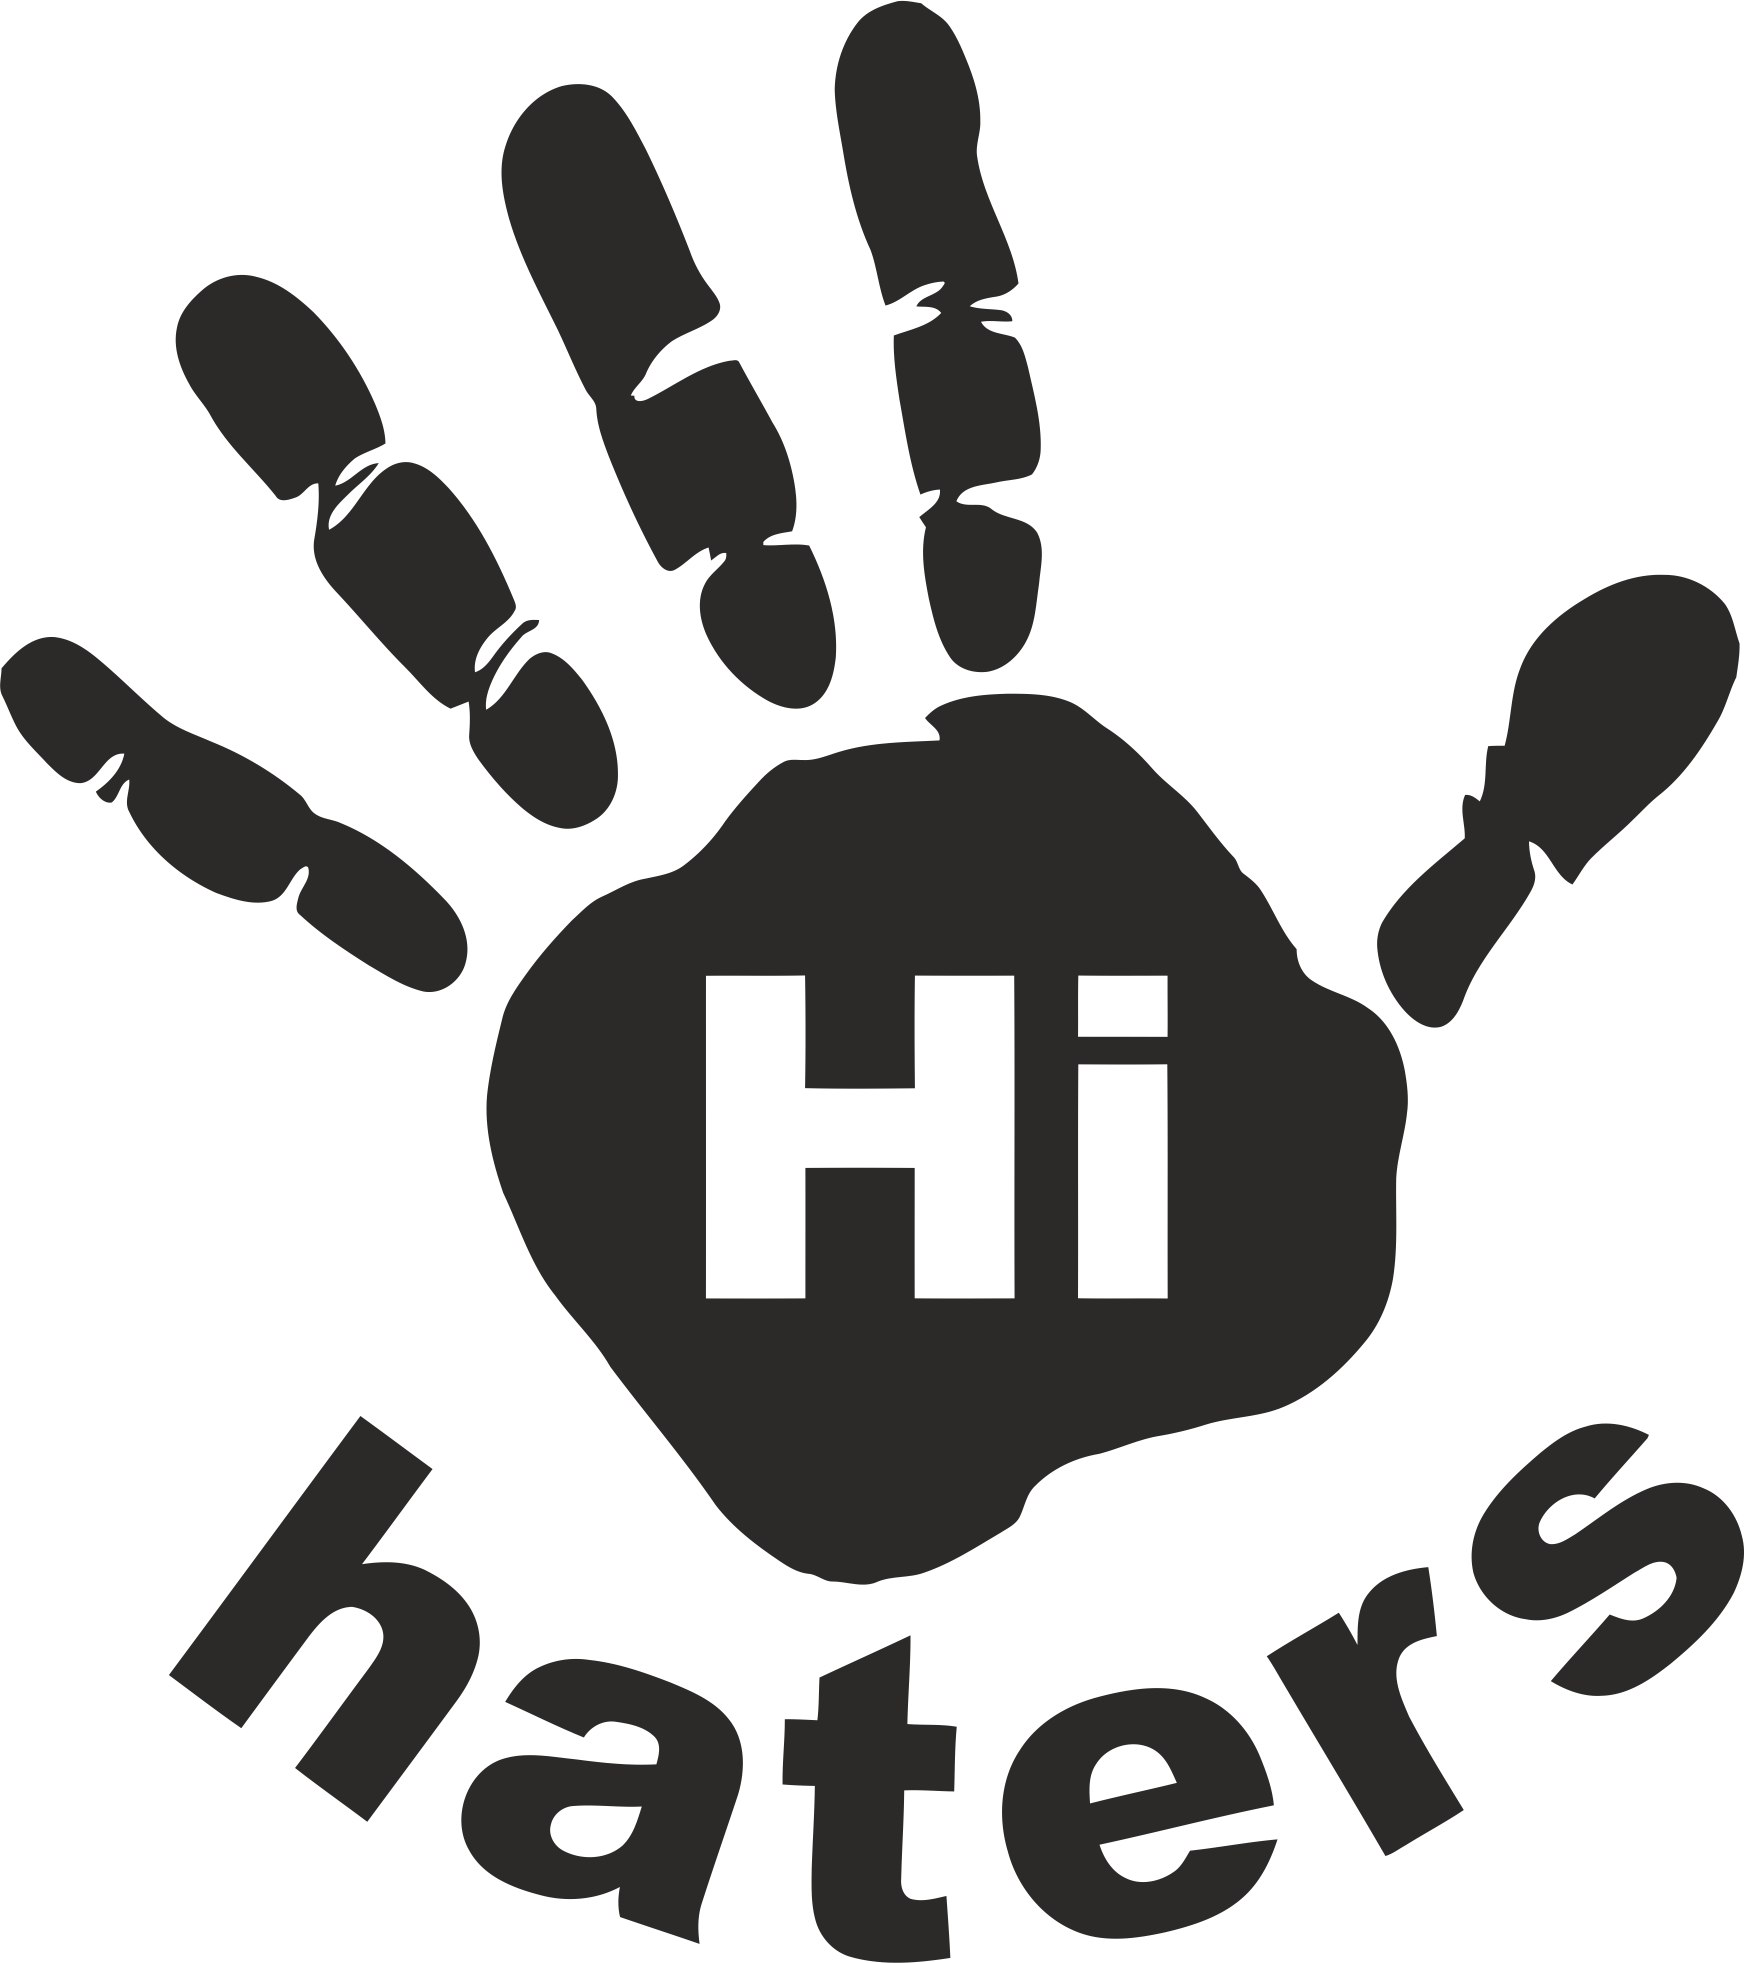 Download Hi Haters Decal (.eps) Free Vector Download - 3axis.co